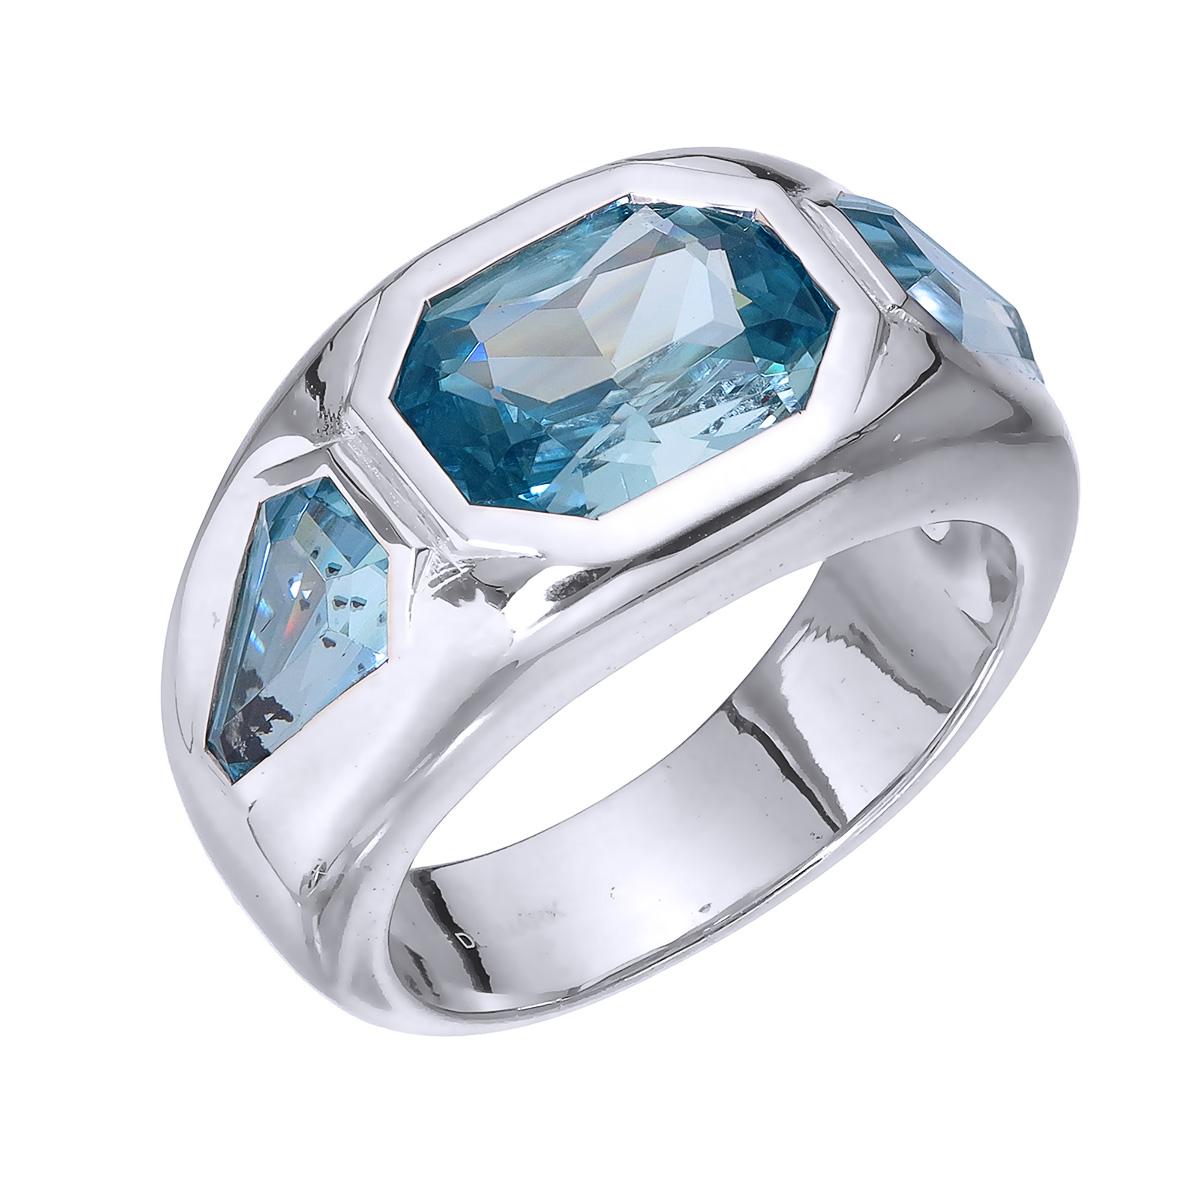 Orloff of Denmark; 925 Sterling Silver Ring set with three Natural Cambodian Blue Zircons totaling to 6.64 carats.

This piece has been meticulously hand-crafted out of 925 sterling silver.
In the center sits a 3.39 carat tropical blue zircon mined,